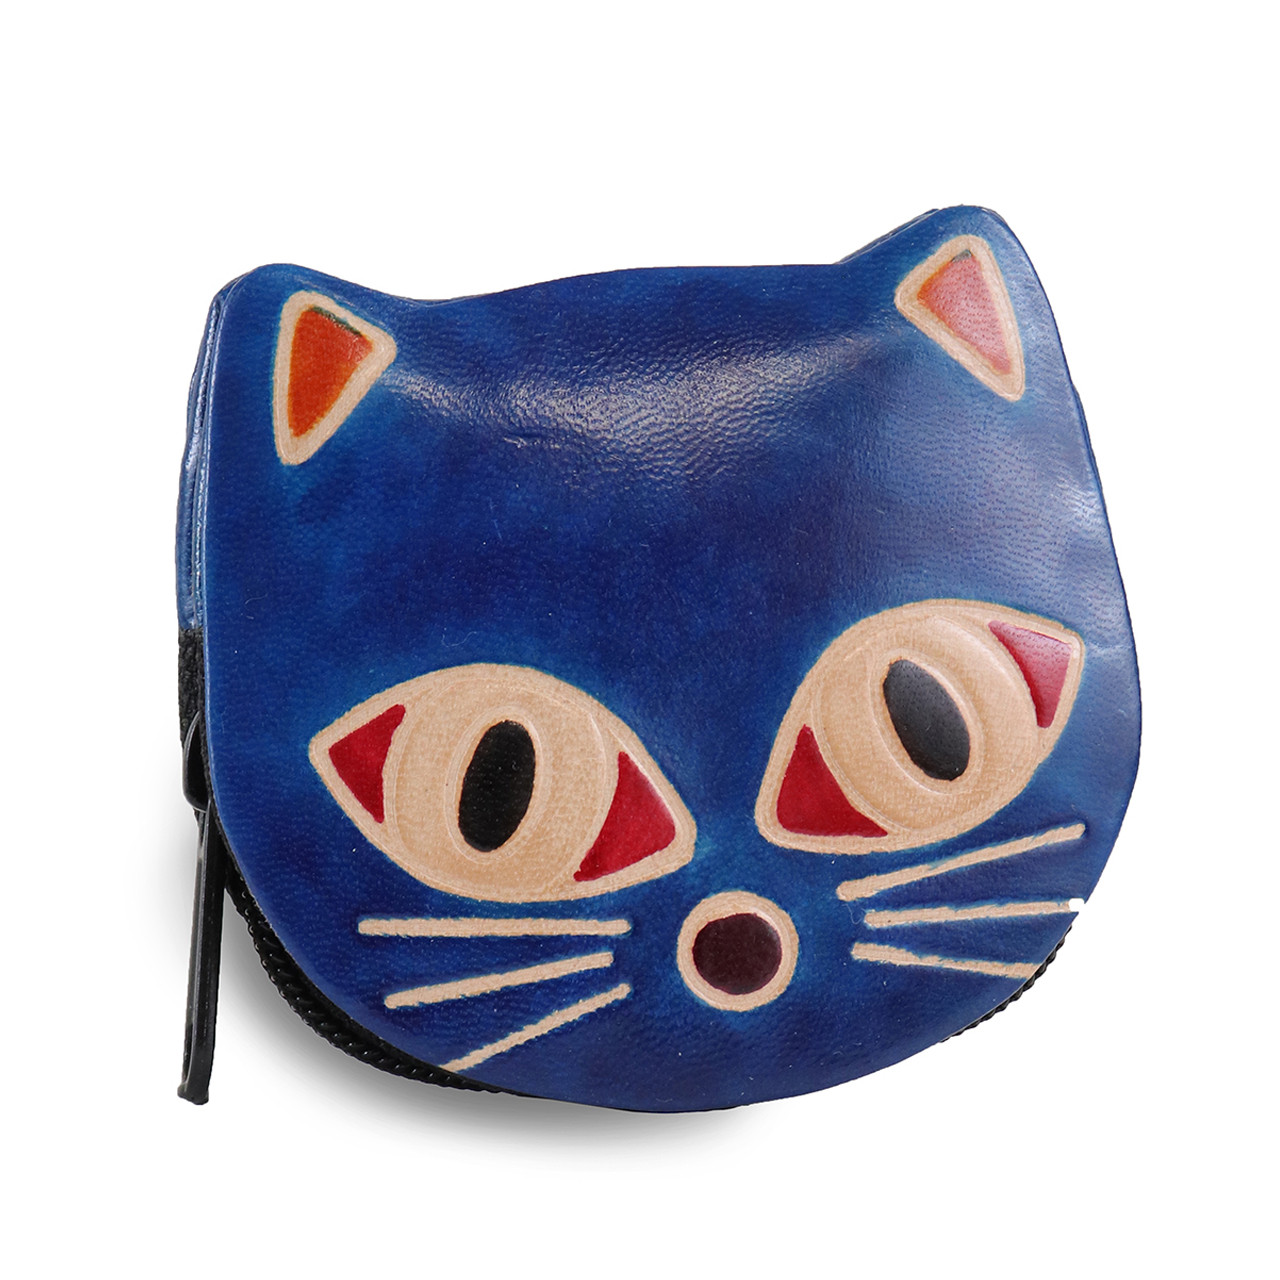 Celestial Black Cat Coin Purse | Icing US